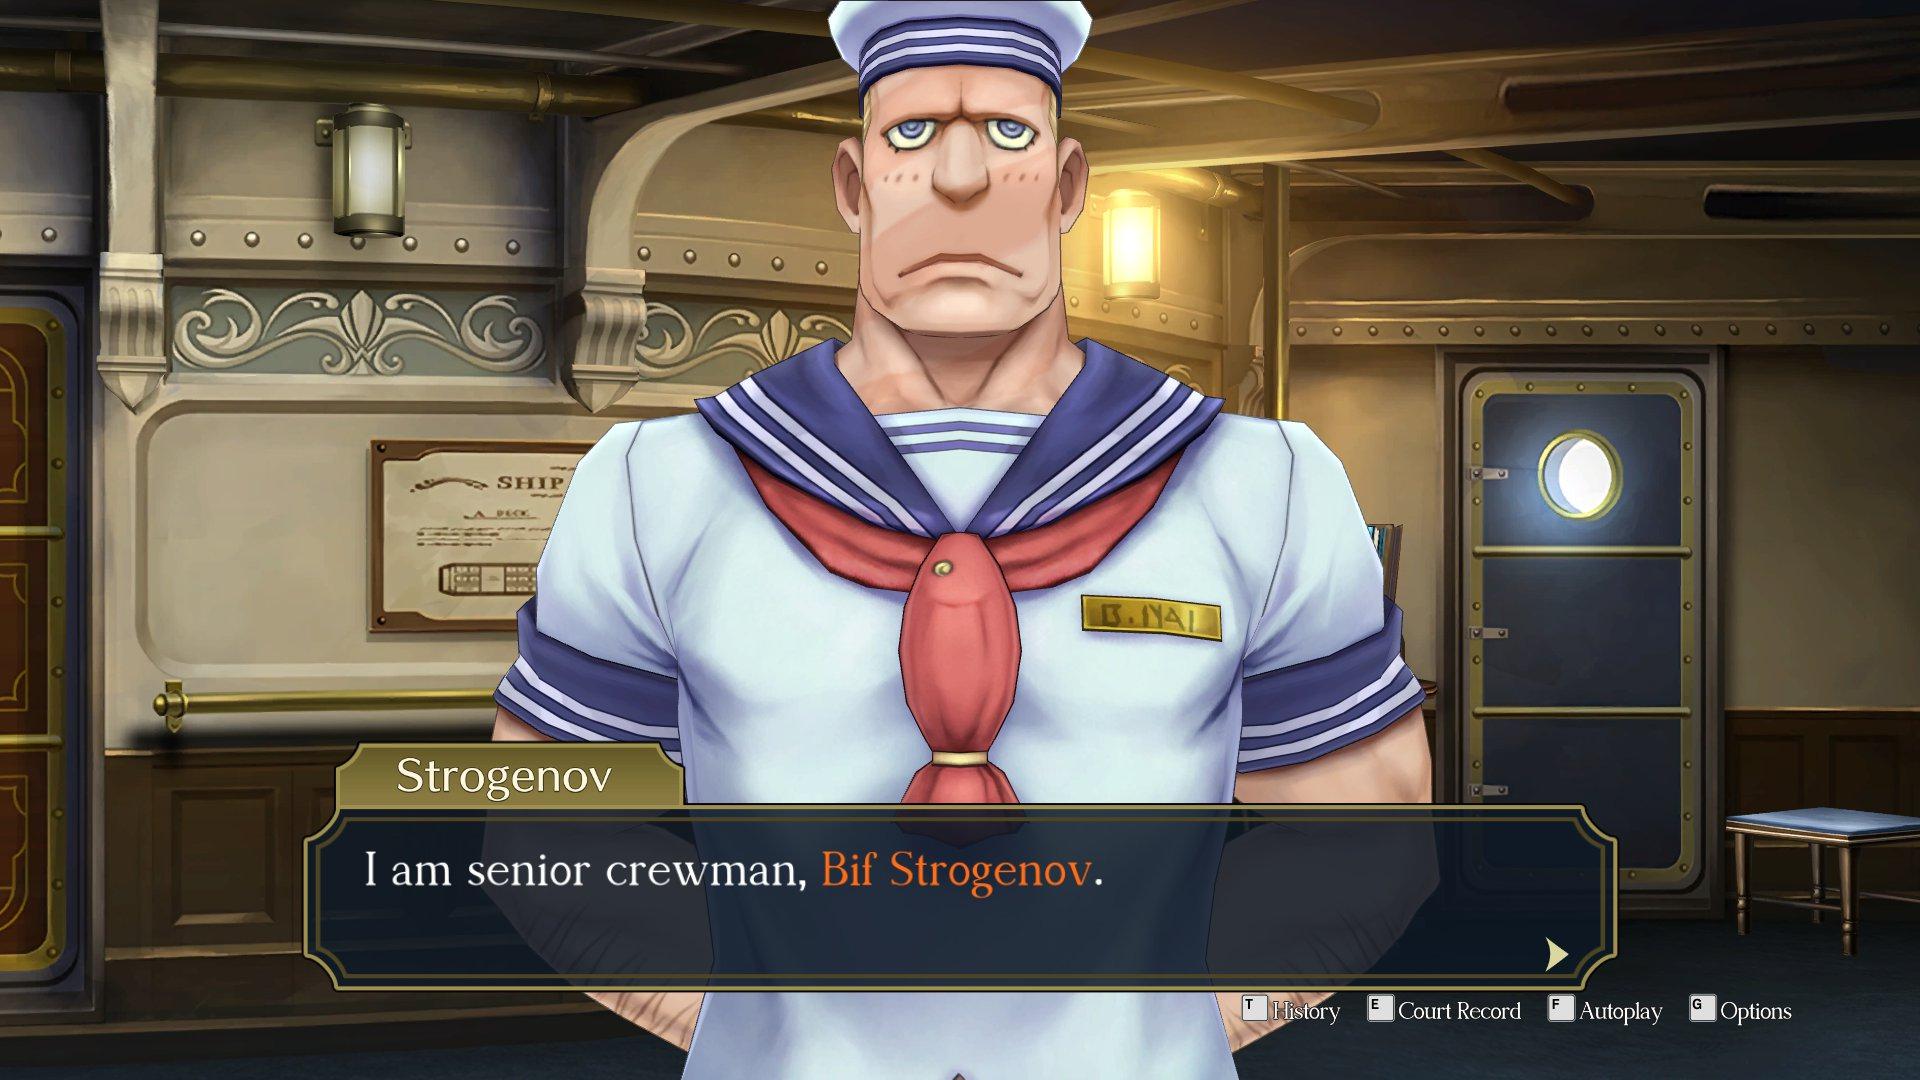 A Russian sailor introducing himself. His name is Bif Strogenov.